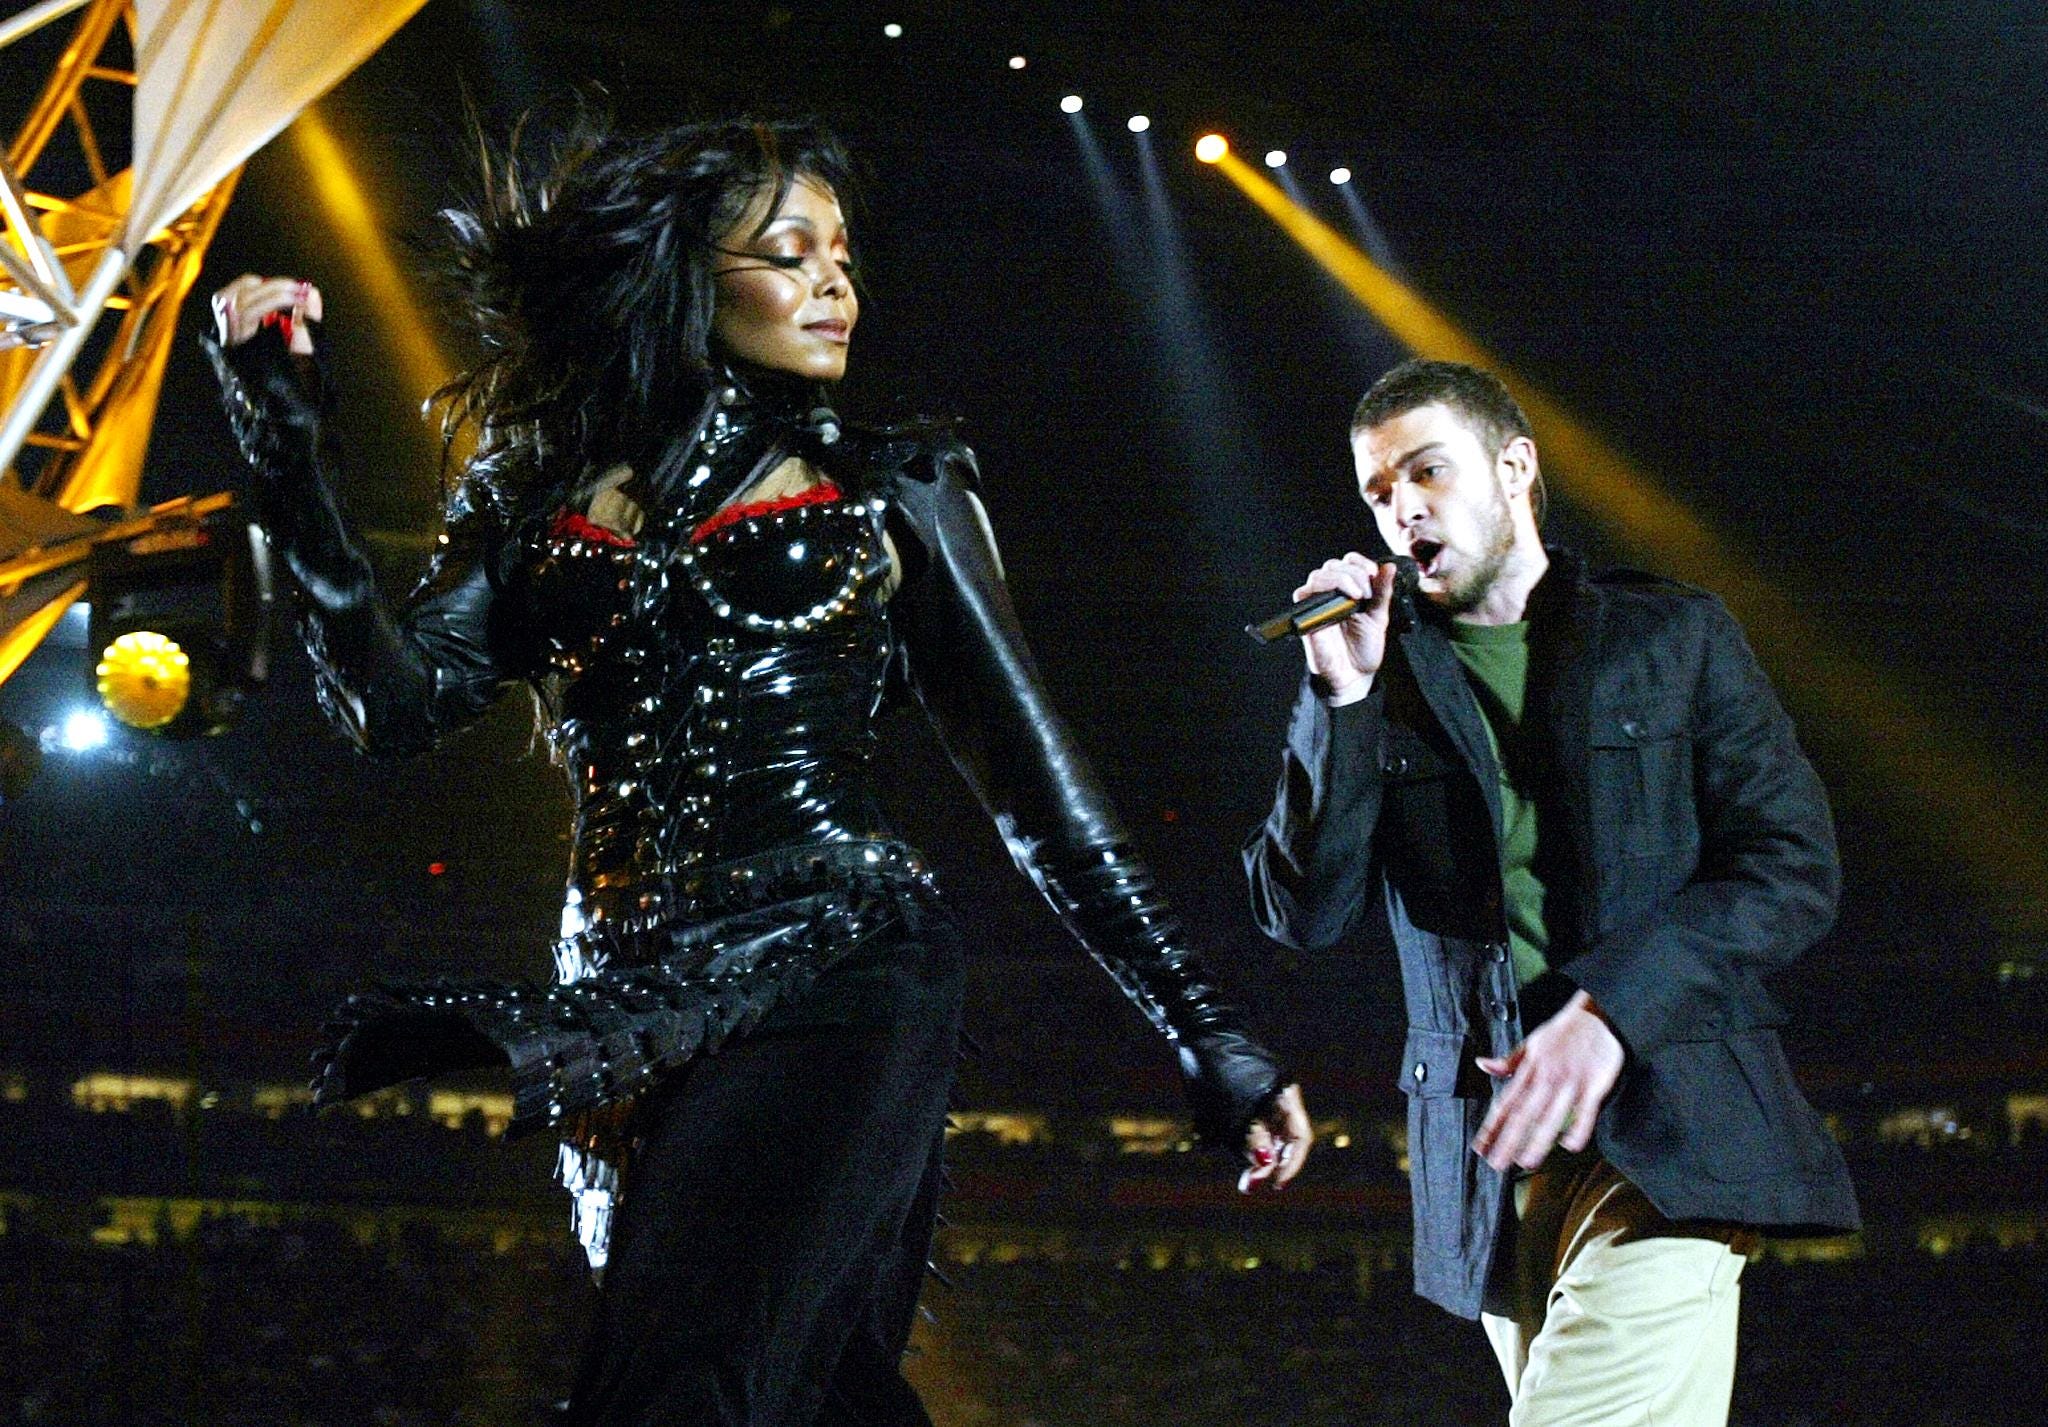 'Nipplegate' revisited: What really happened between Janet Jackson and Justin Timberlake?